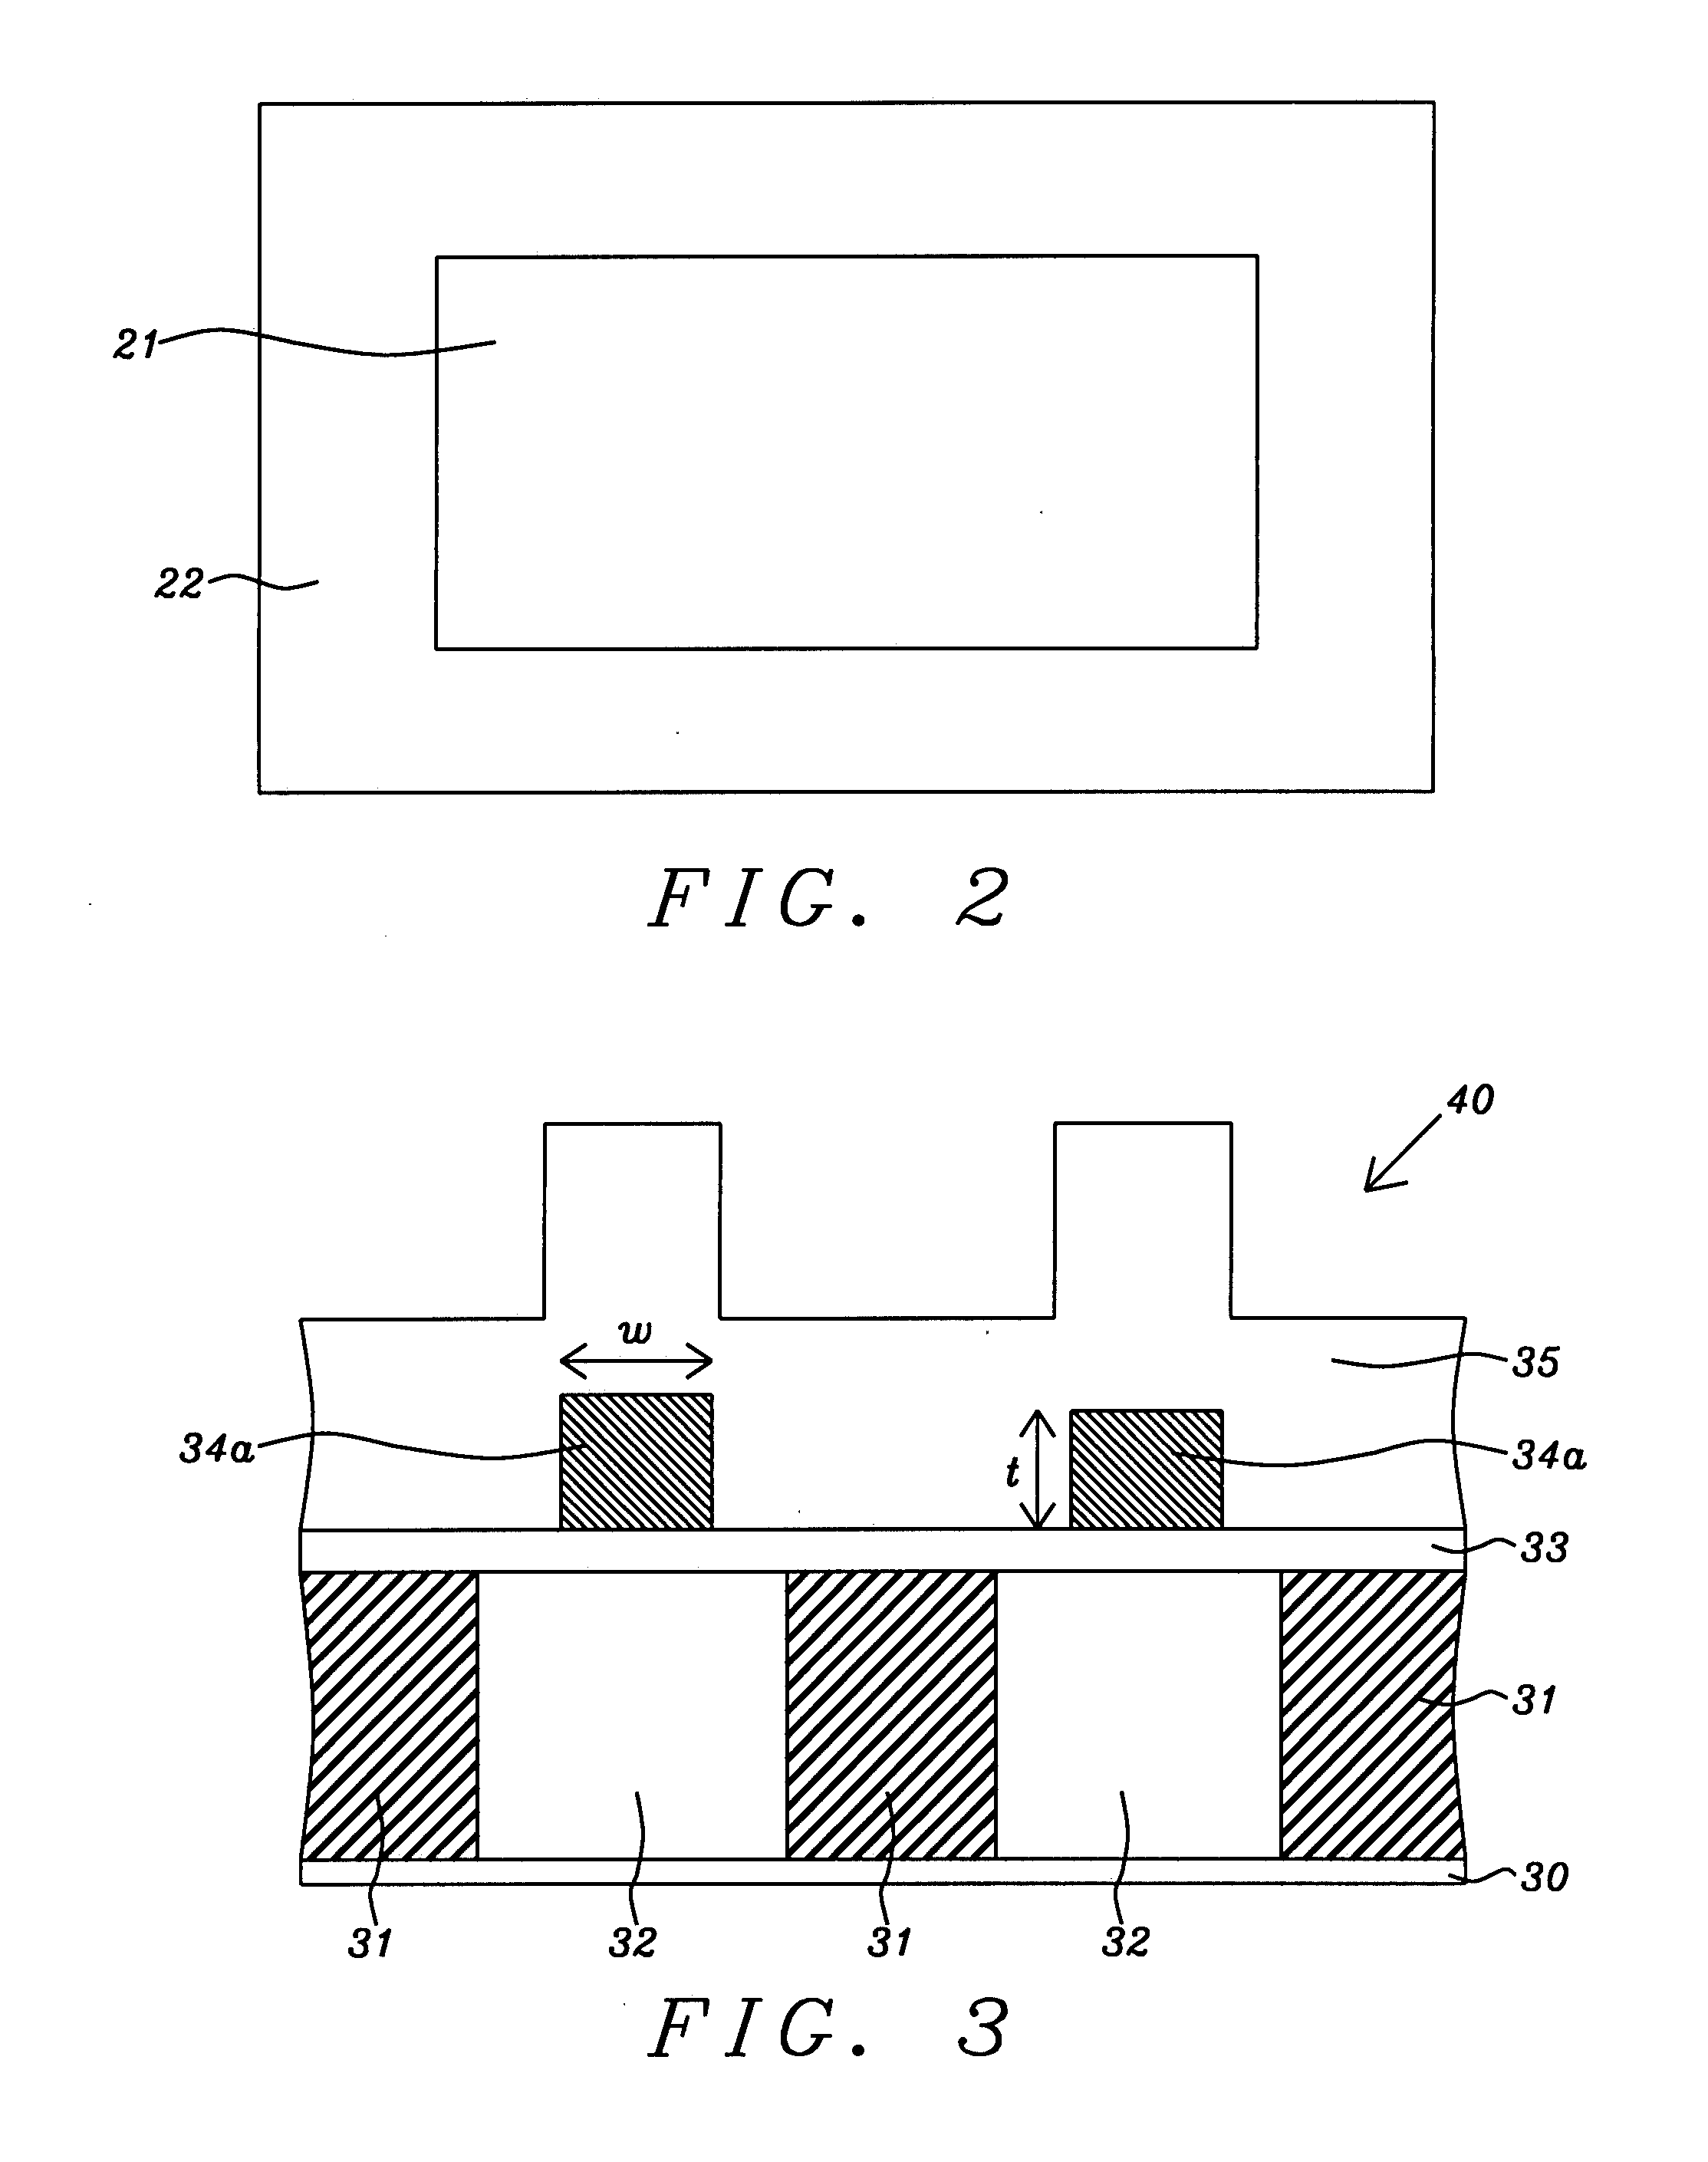 Method of magnetic tunneling junction pattern layout for magnetic random access memory